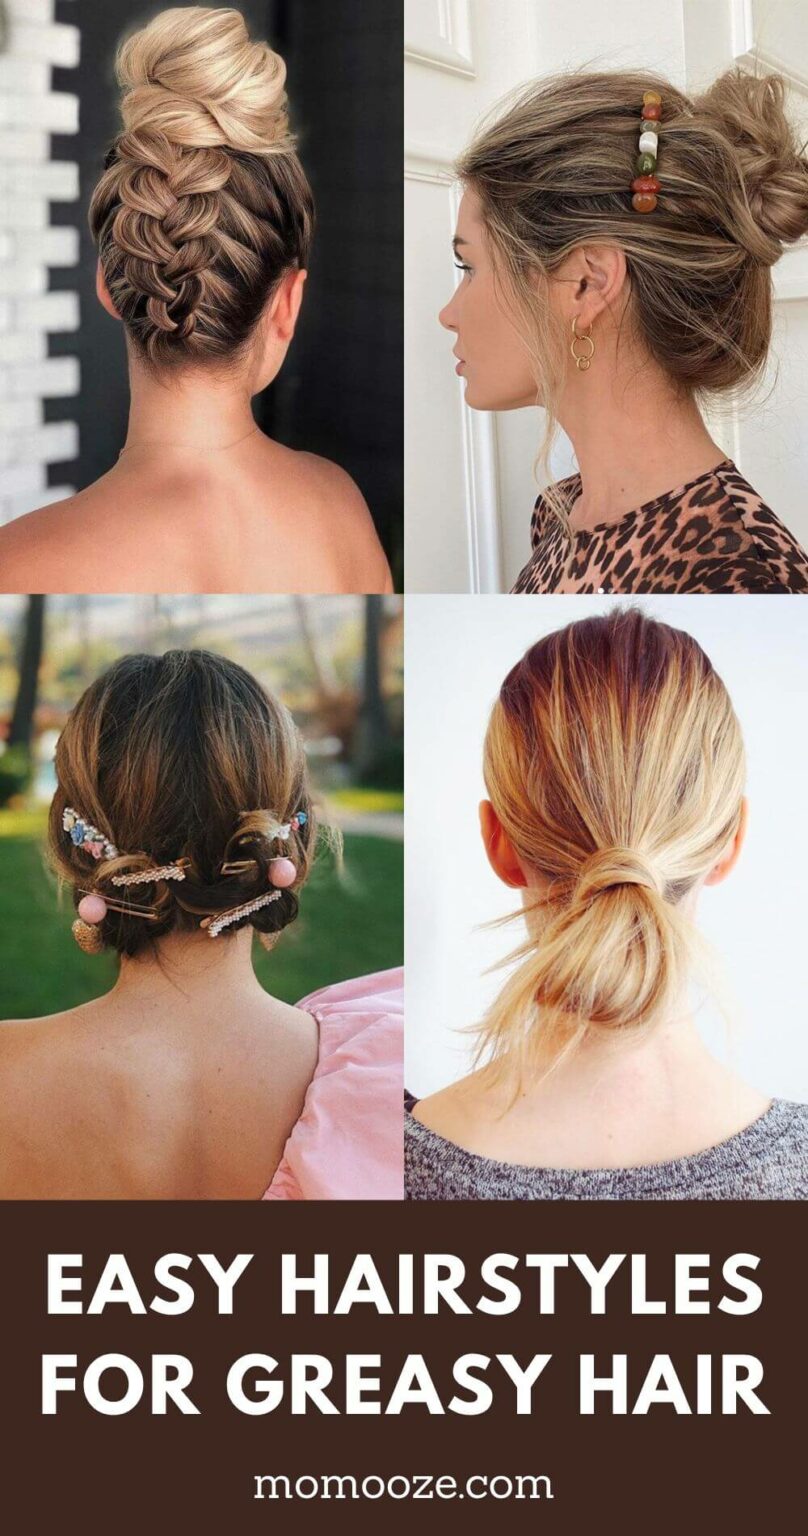 33+ Super Easy Hairstyles For Greasy Hair For Your Bad Hair Day